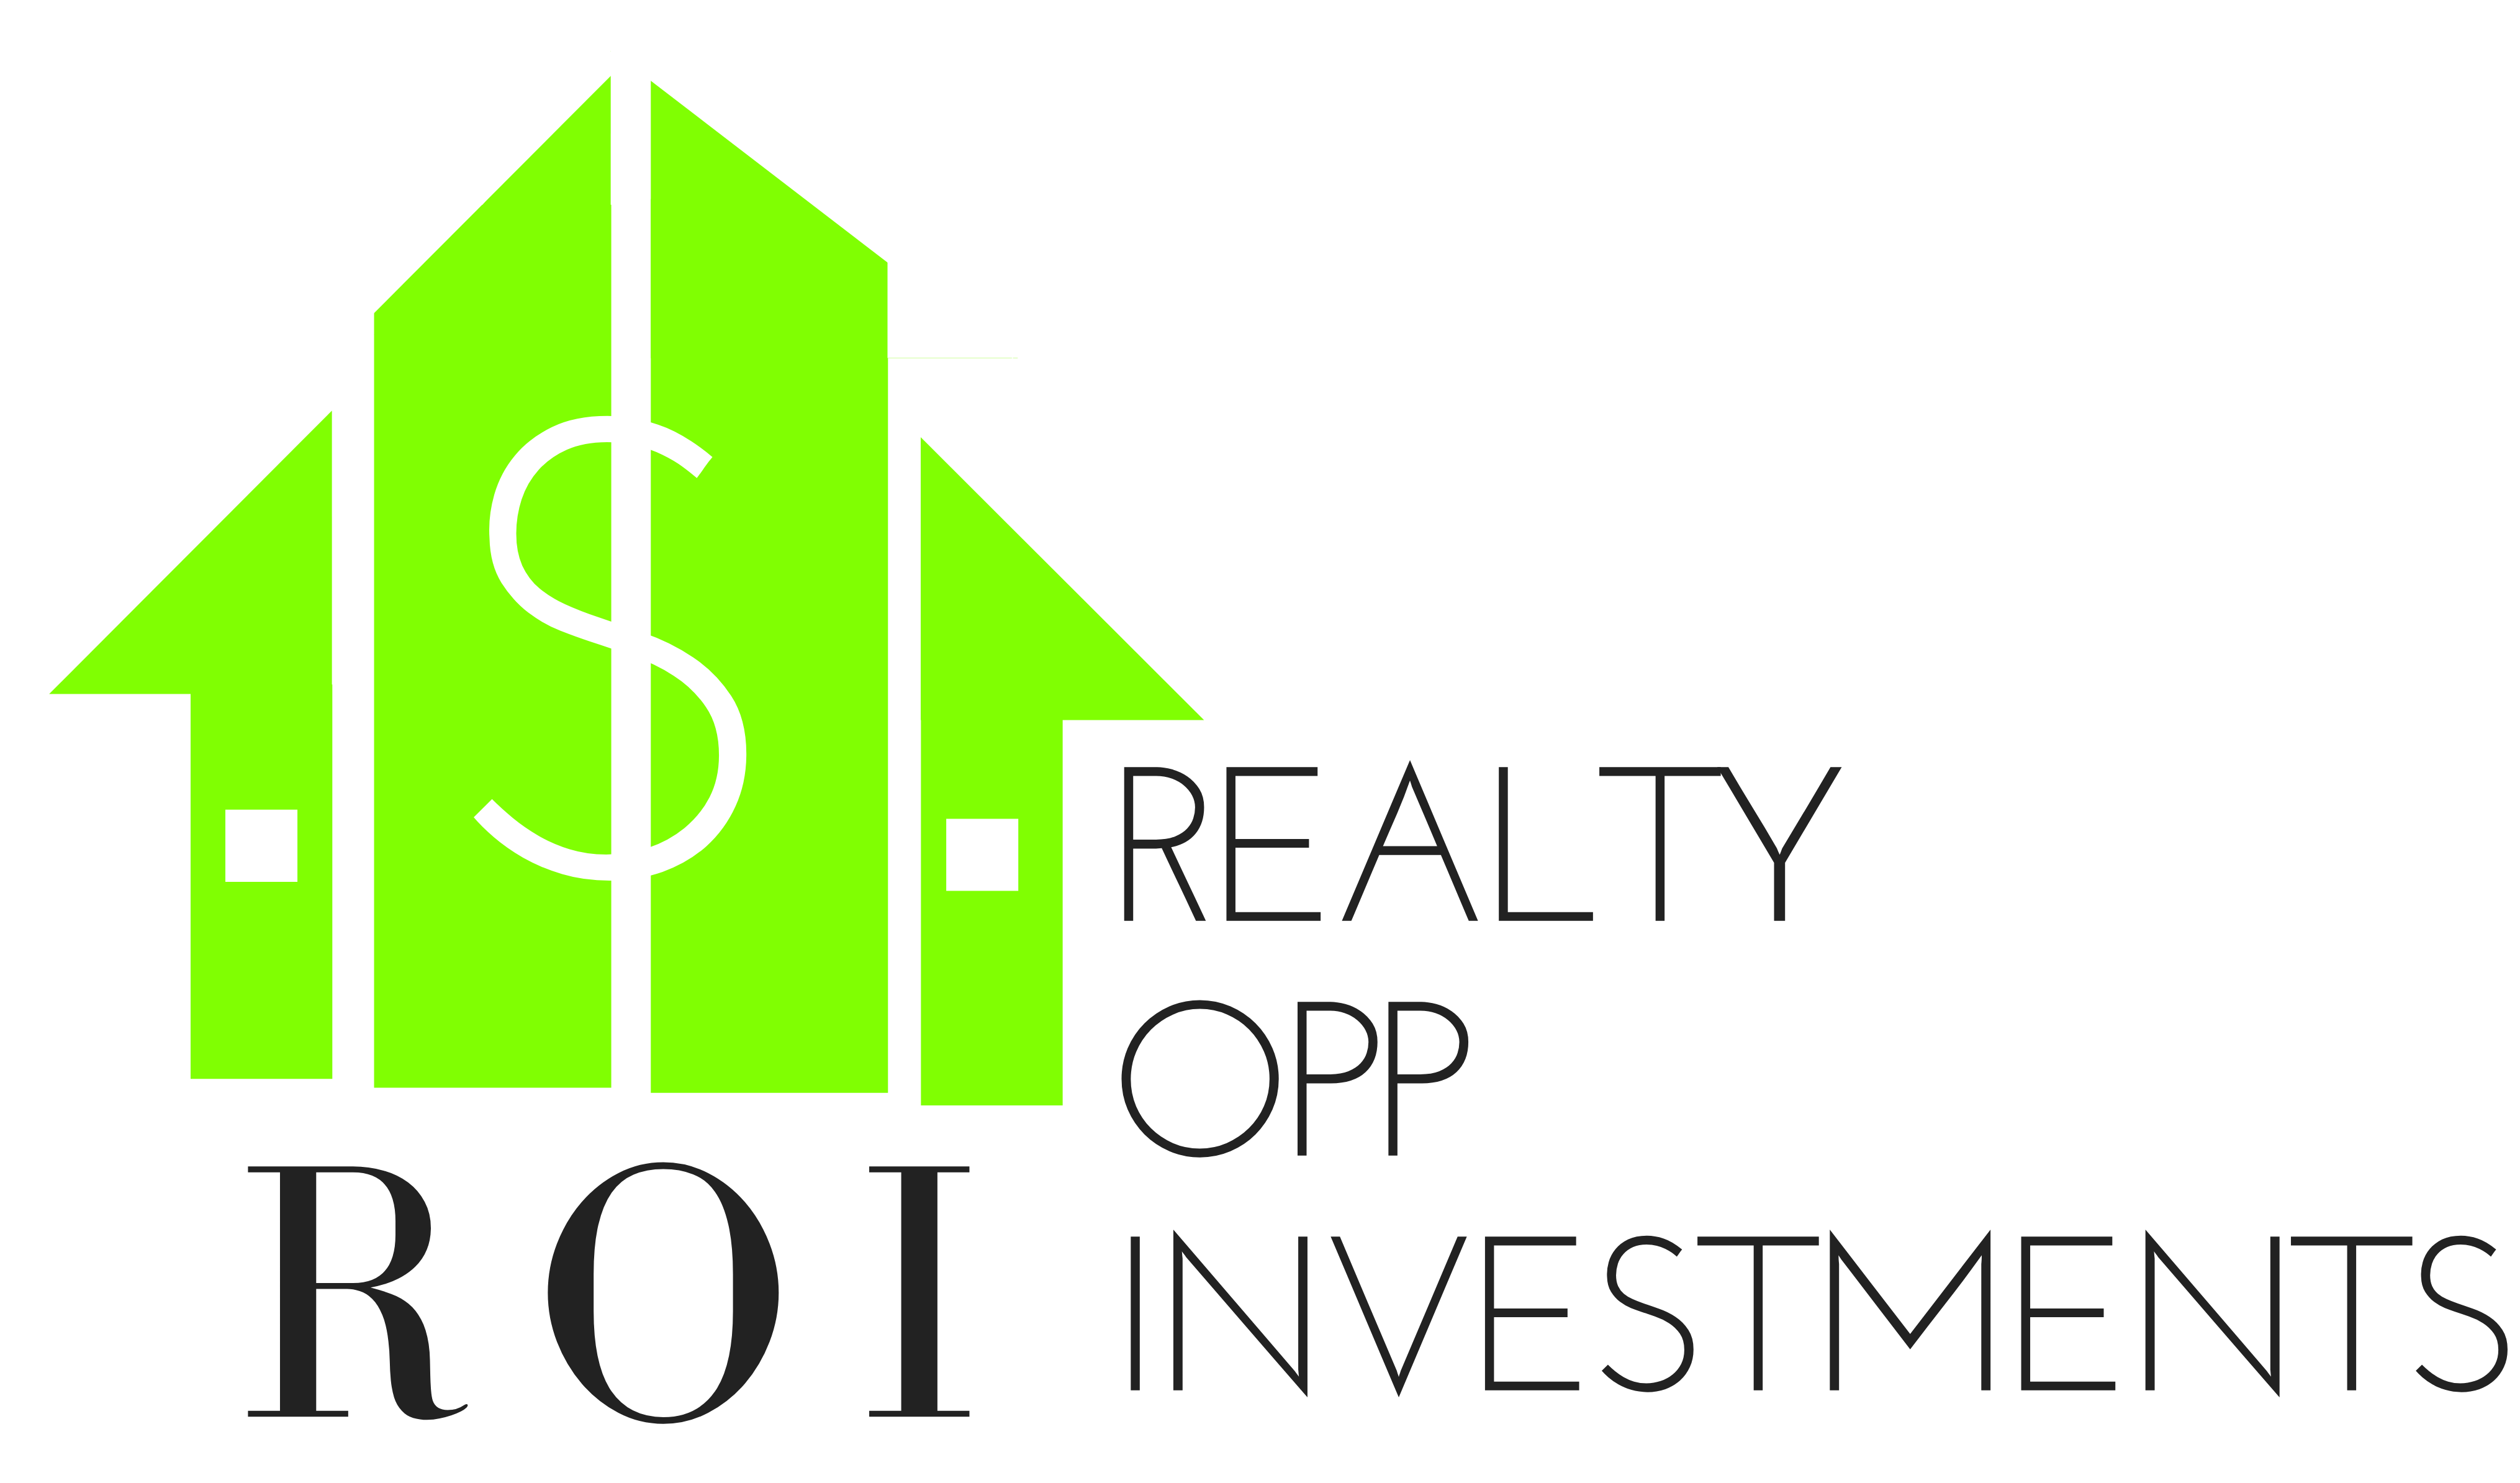 Realty Opp Investments LLC